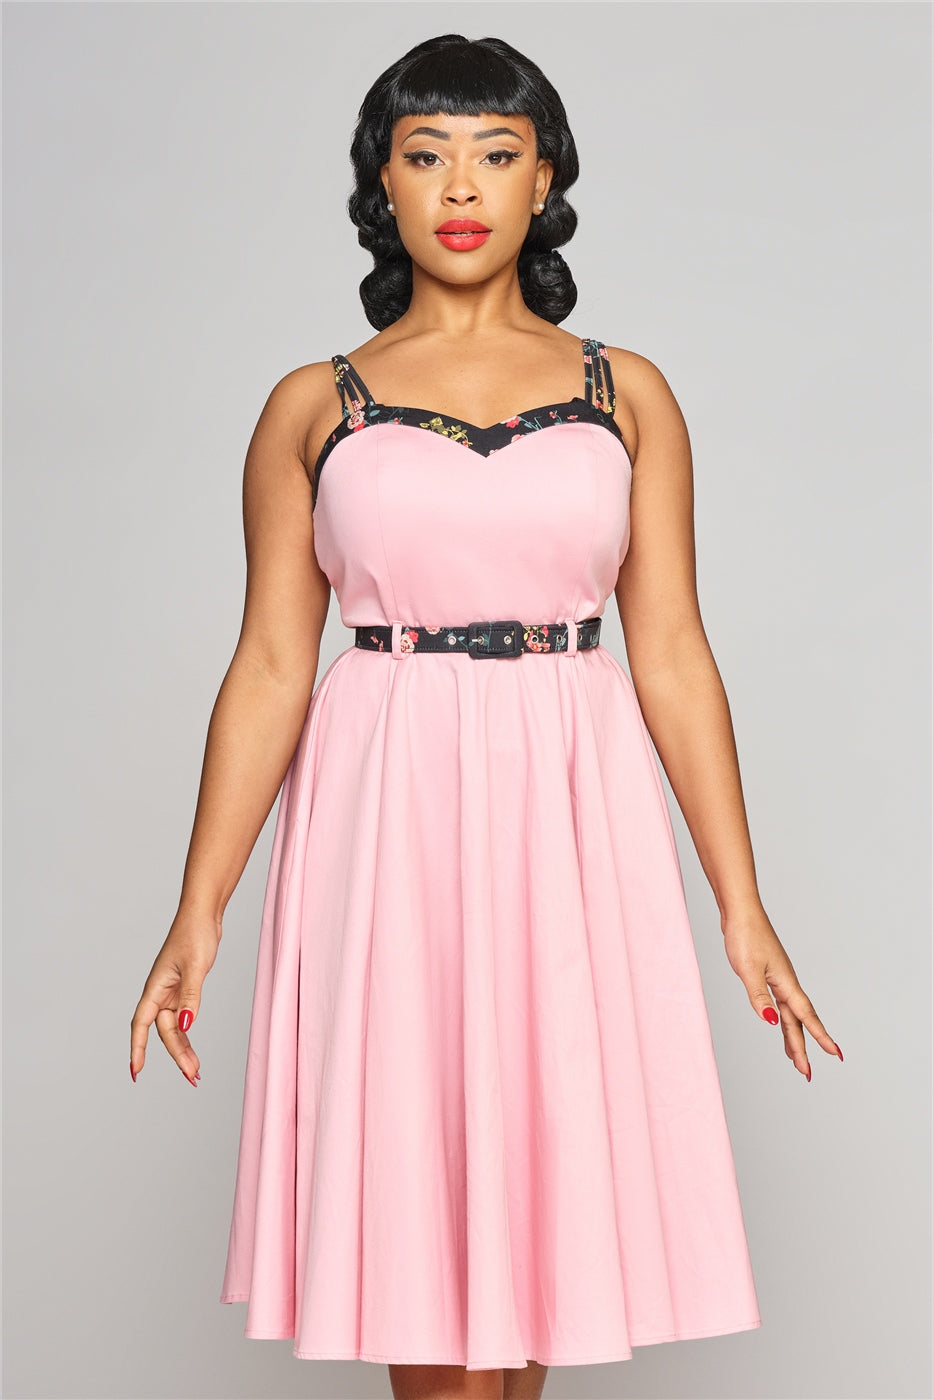 elegant woman standing wearing a pink 50s style dress with a sweetheart neckline and belt.